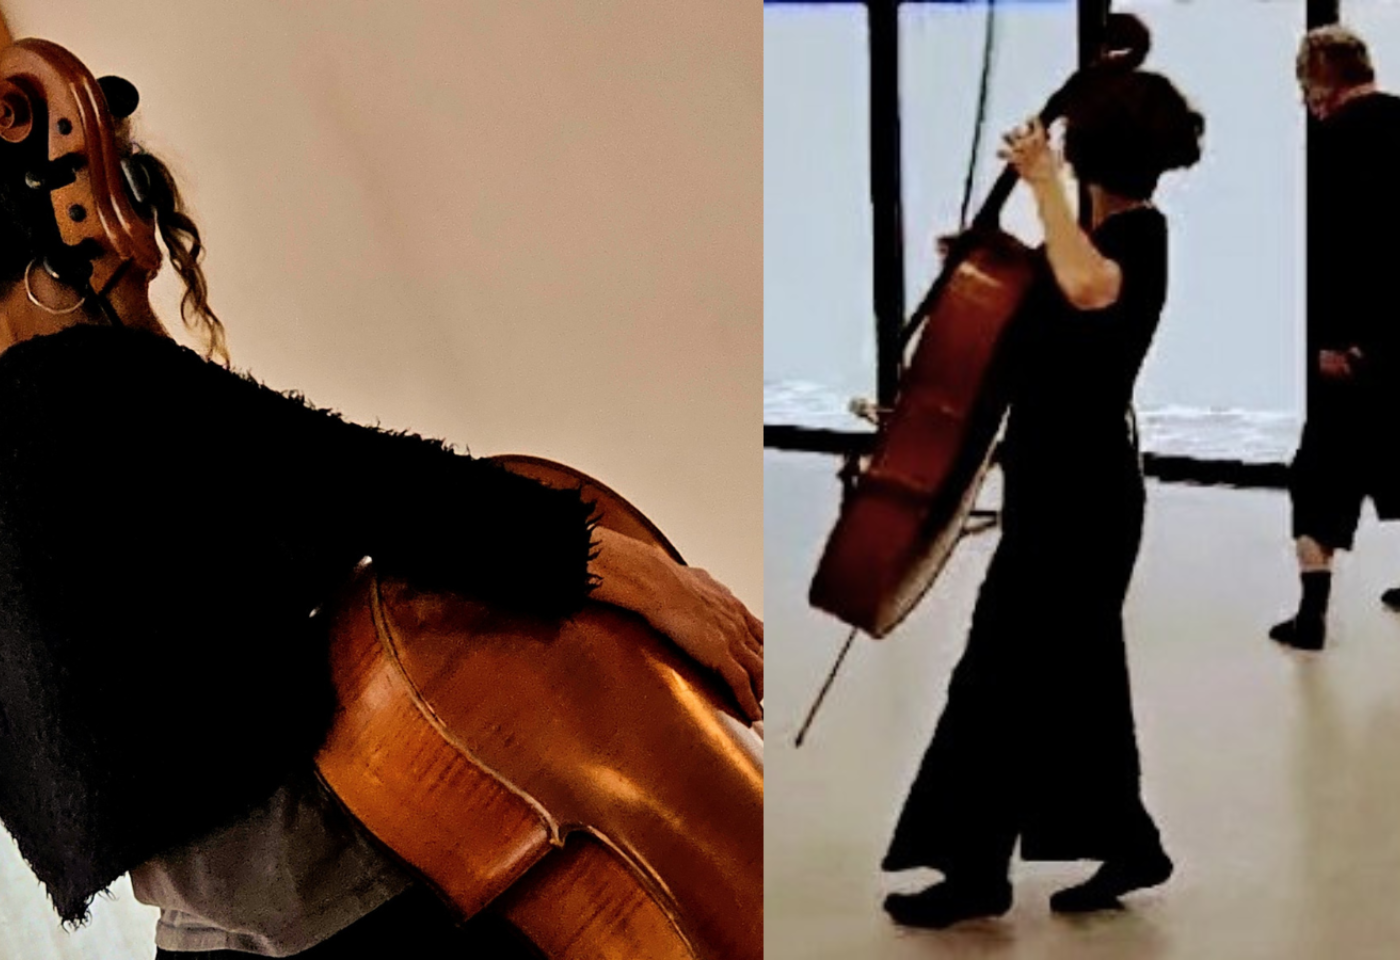 Making Space: Turning My Cello Around - Bela Emerson